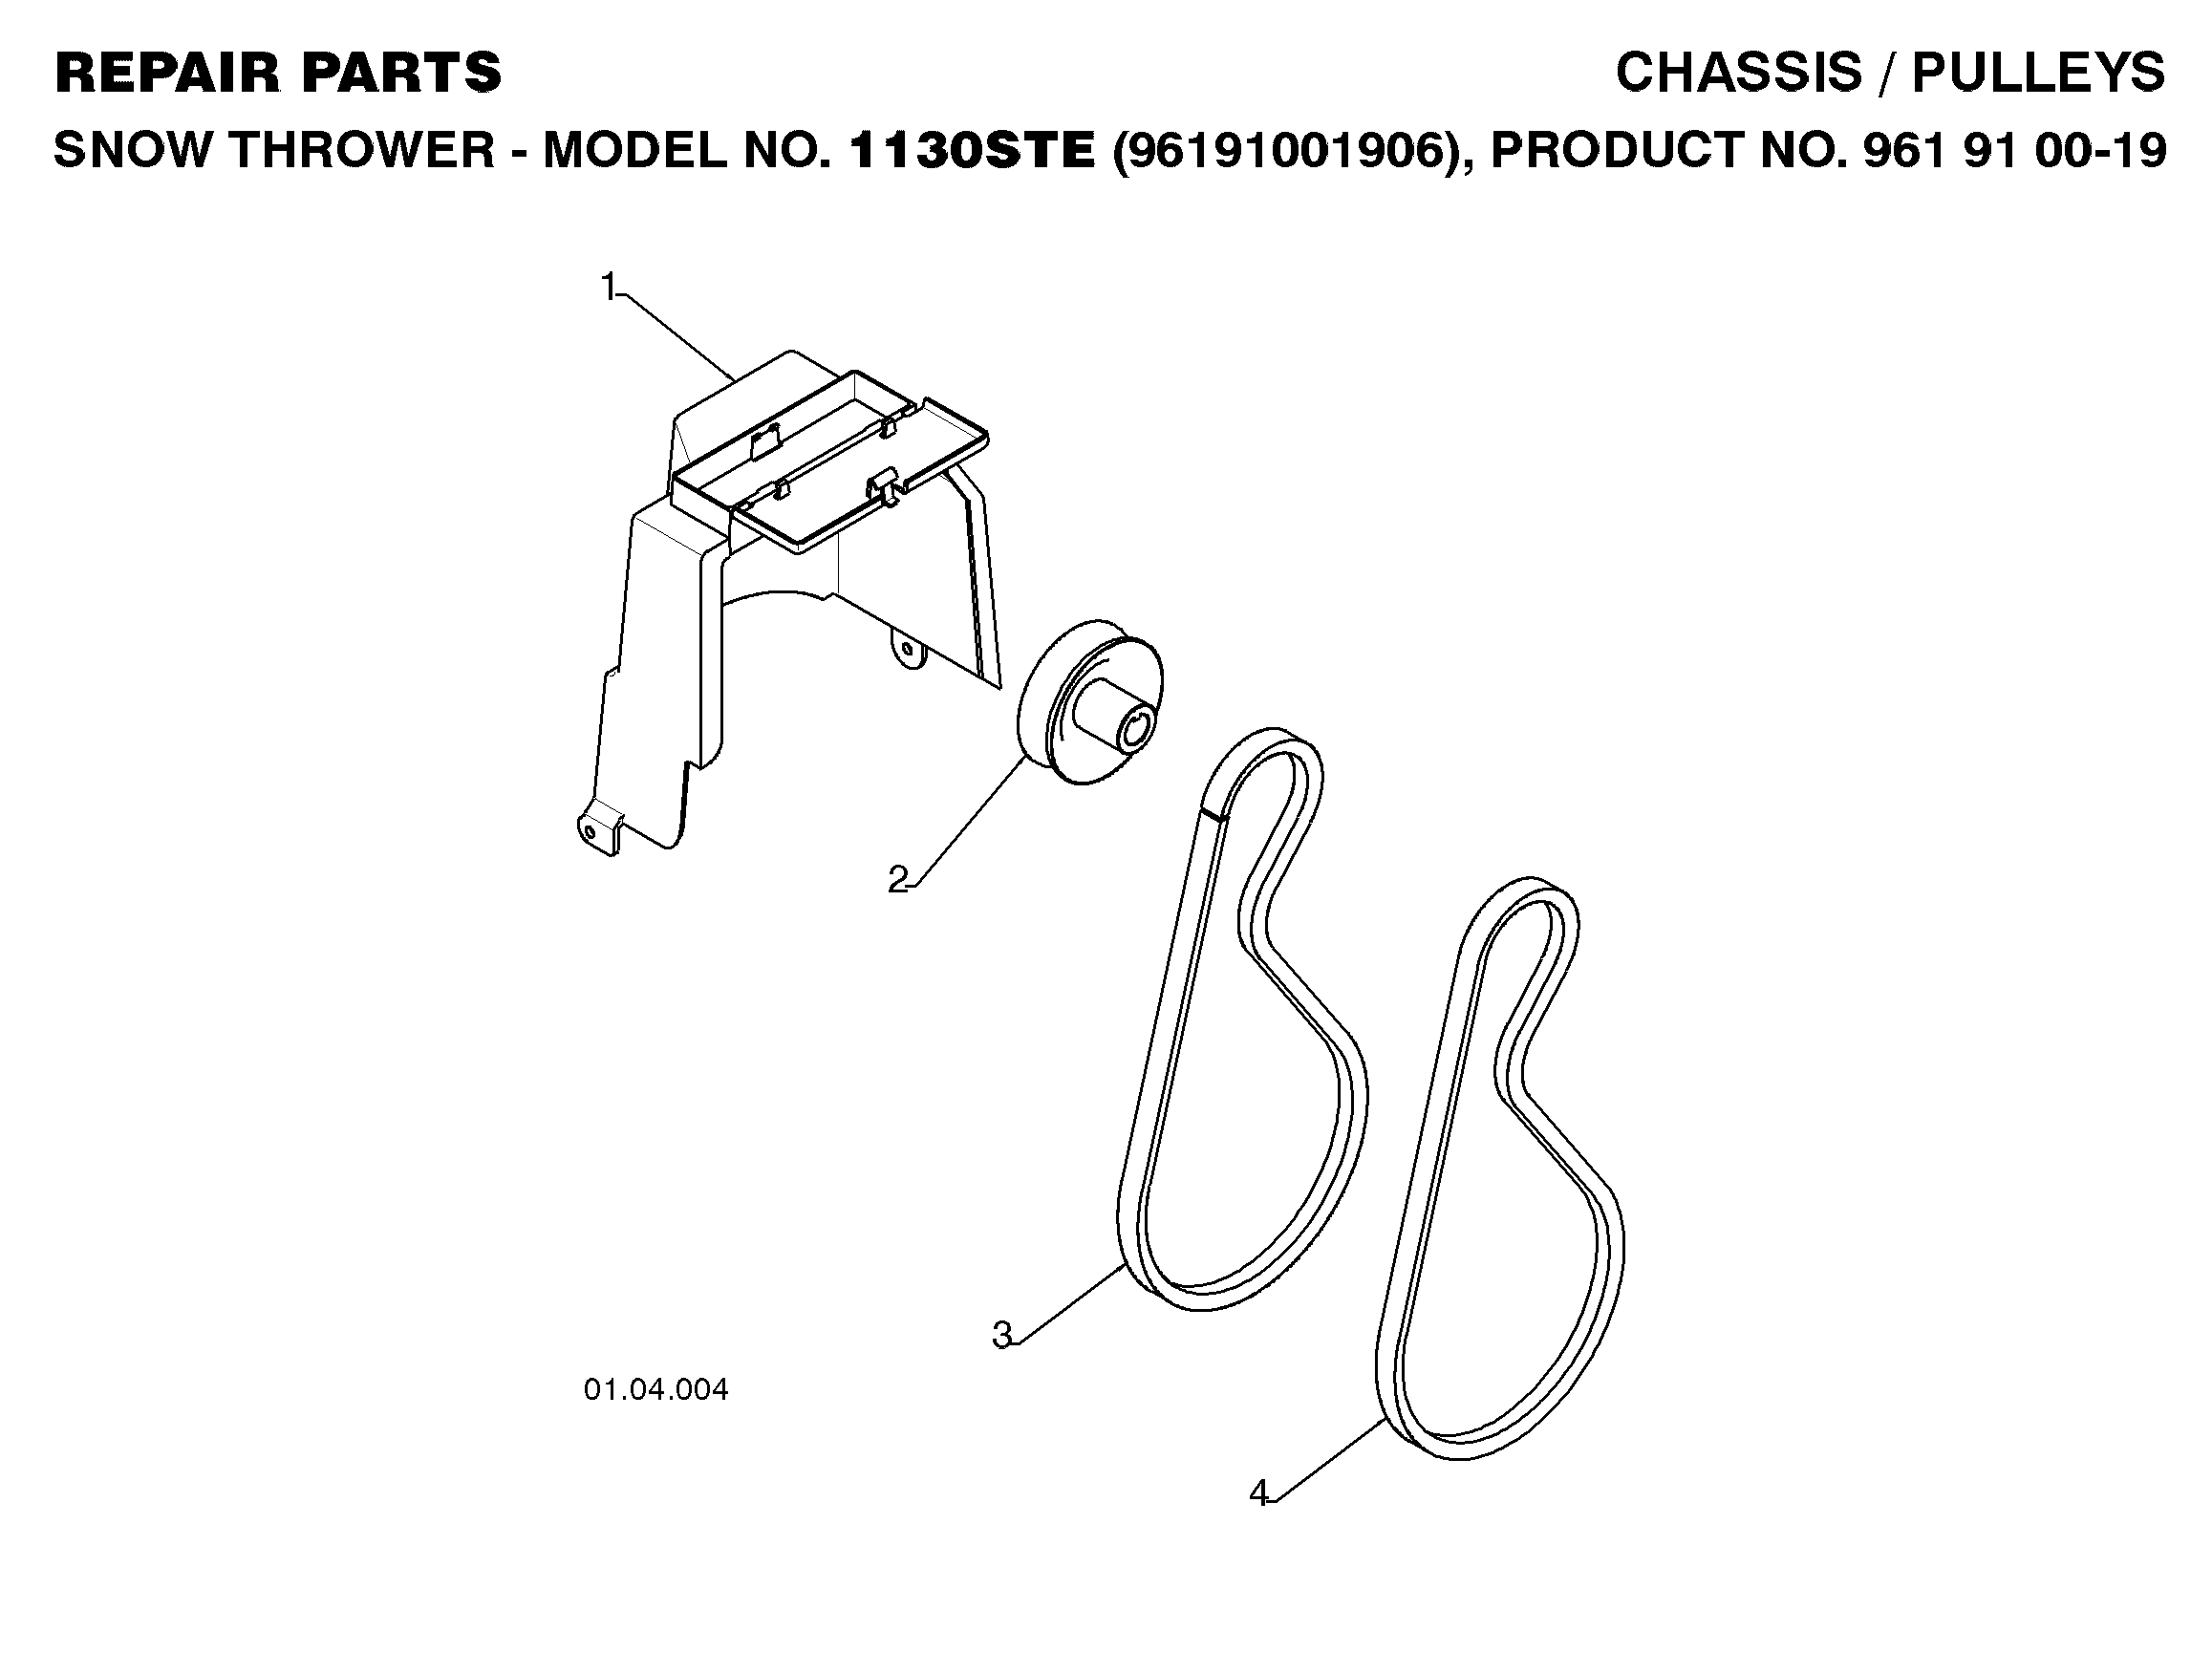 Chassis and appendix 532409161, 532178813, 532419744, 532408019